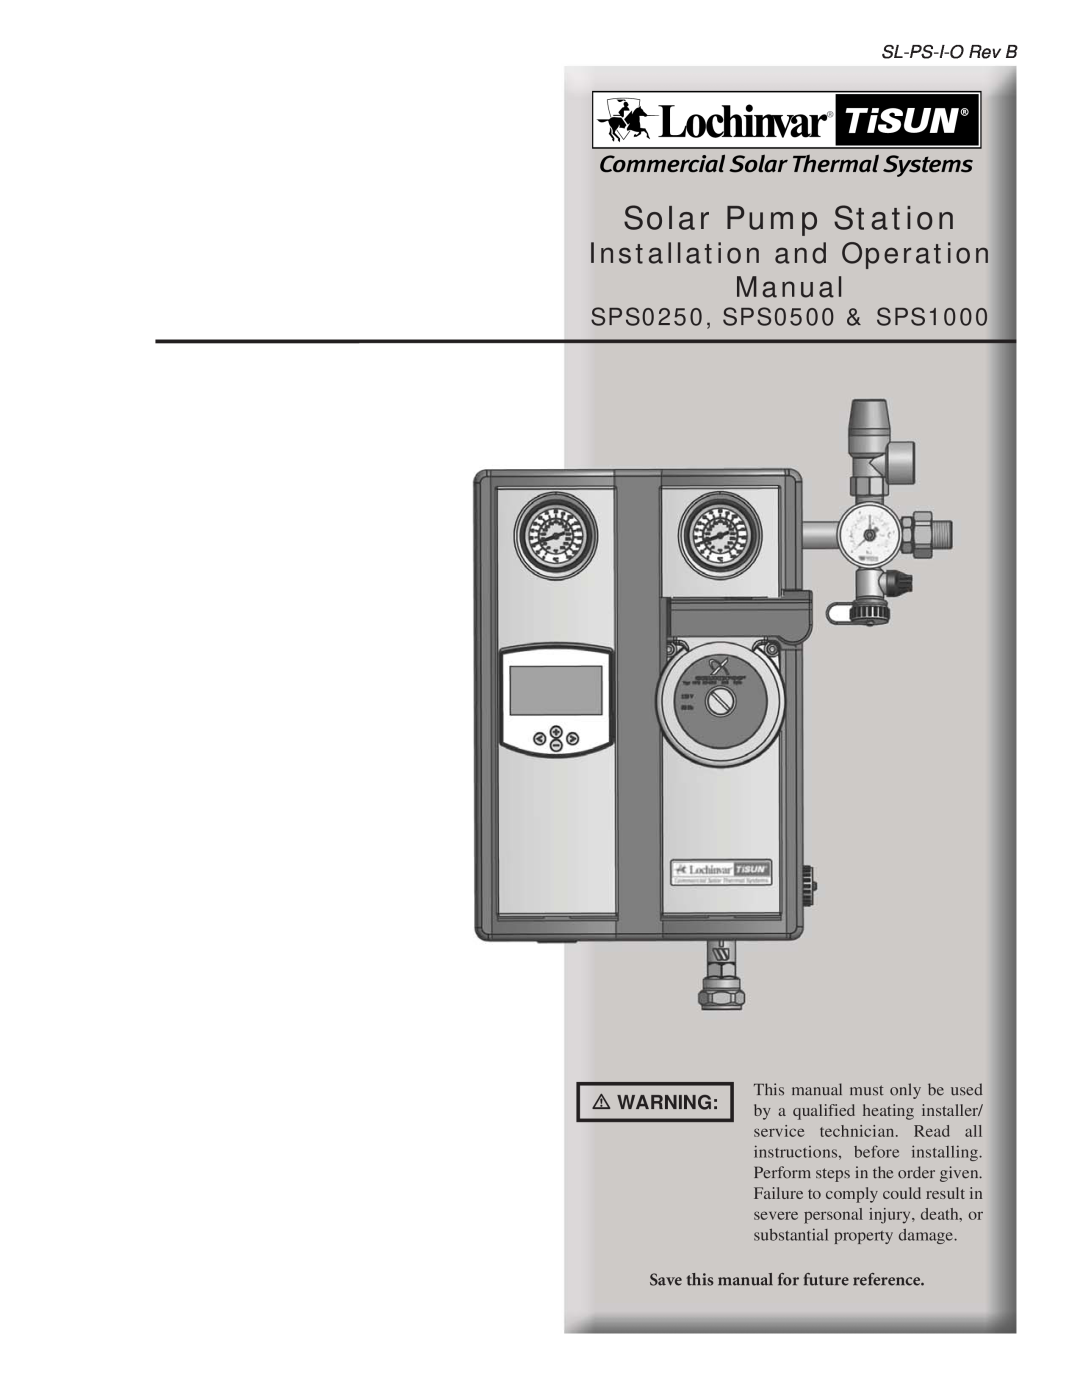 Lochinvar SPS0500, SPS0250 operation manual SL-PS-I-ORev B, Save this manual for future reference, Solar Pump Station 